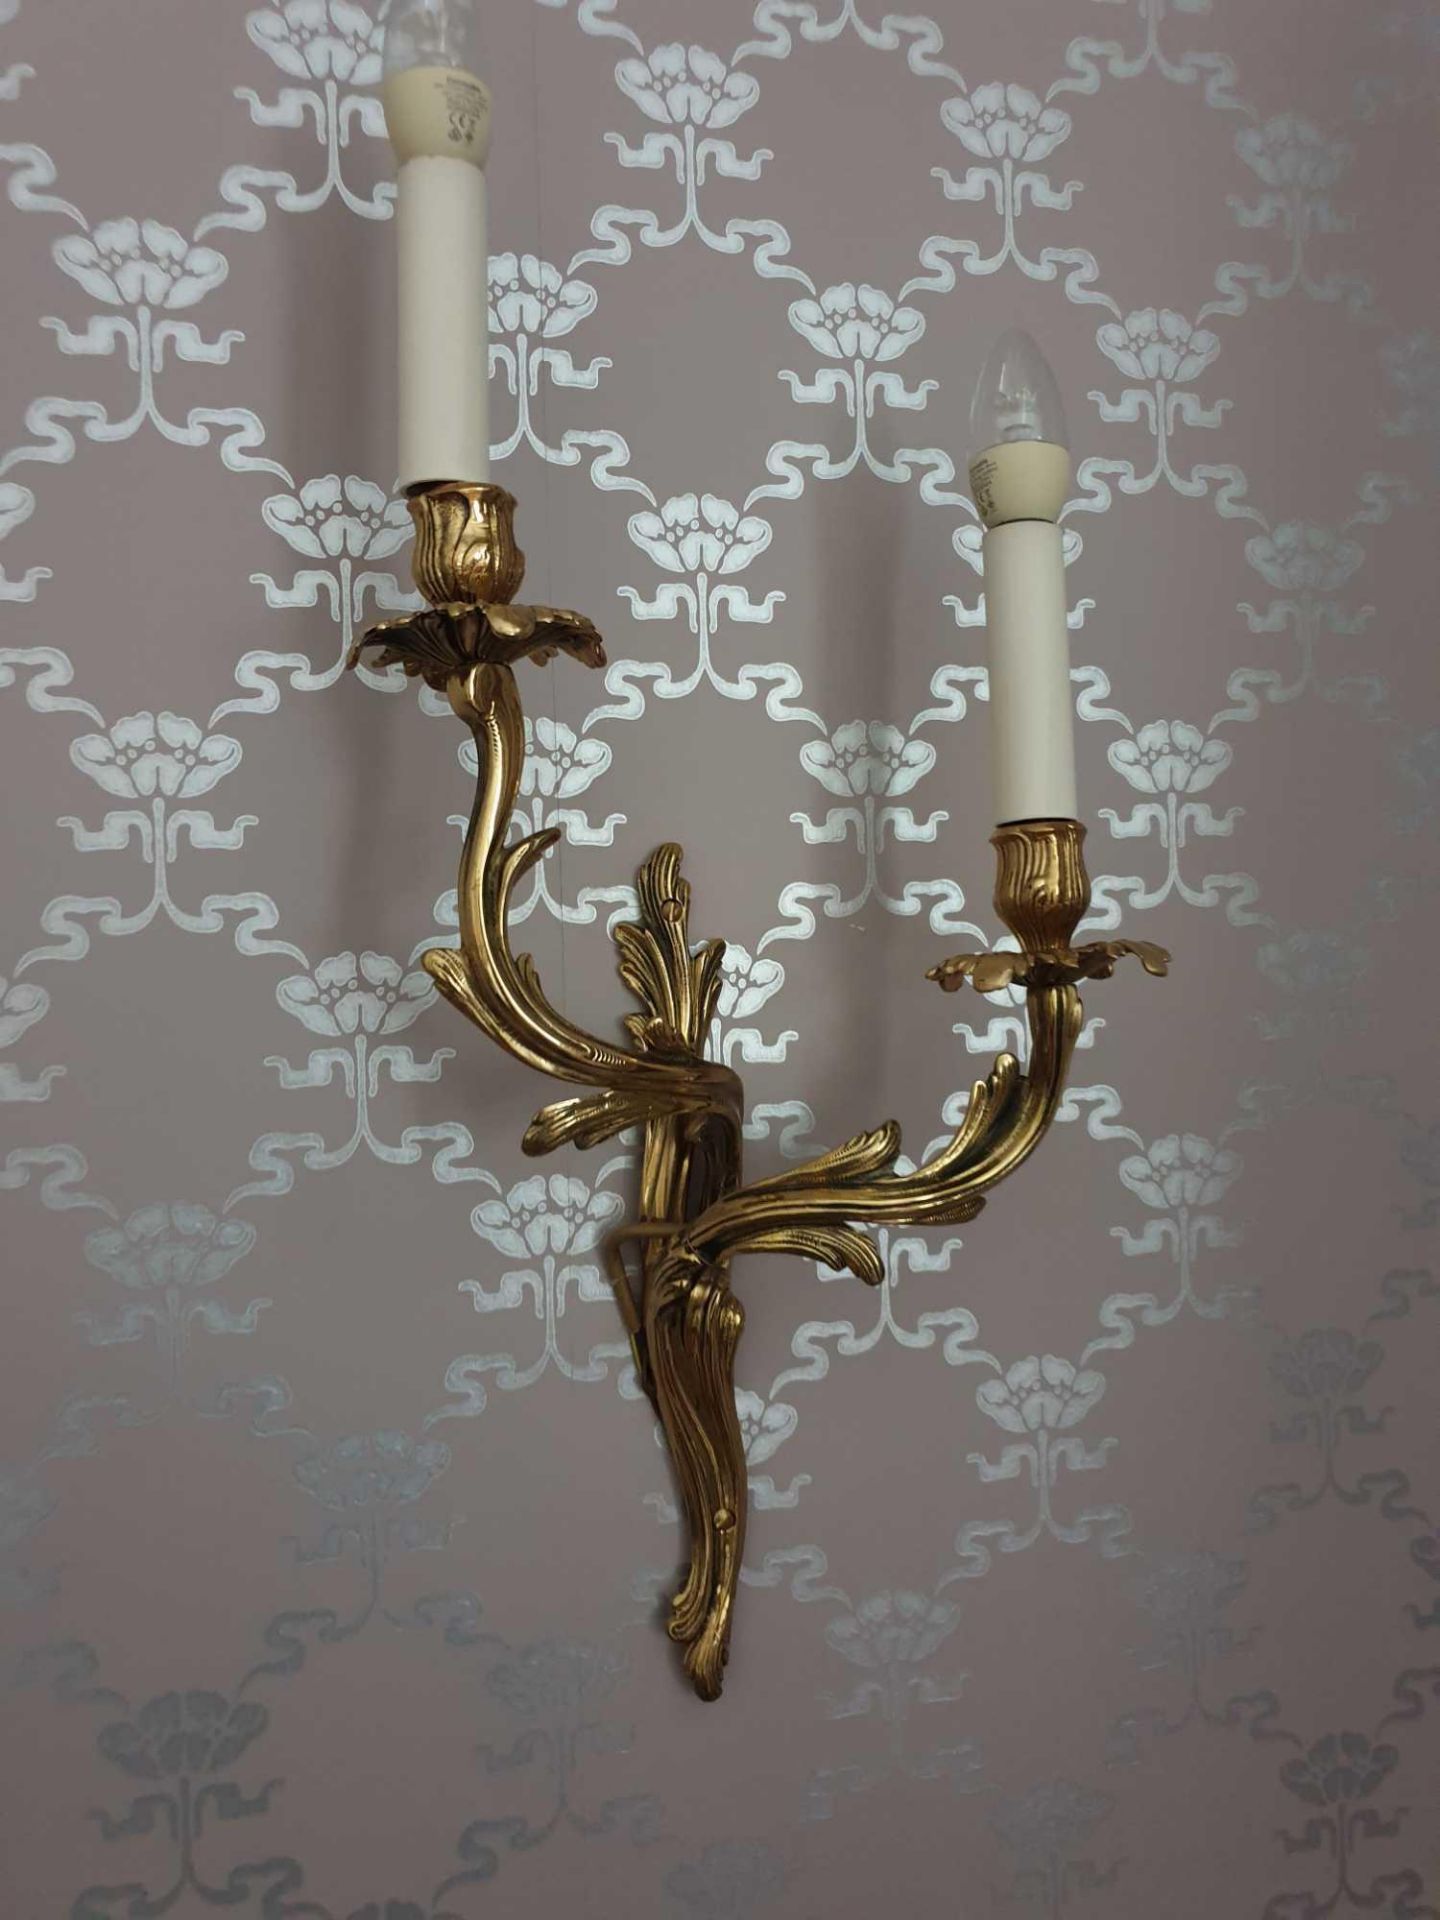 A Pair Of Louis XV Style Wall Appliques In Gilt Bronze With Two Candles Agrafe Decor On Which Are